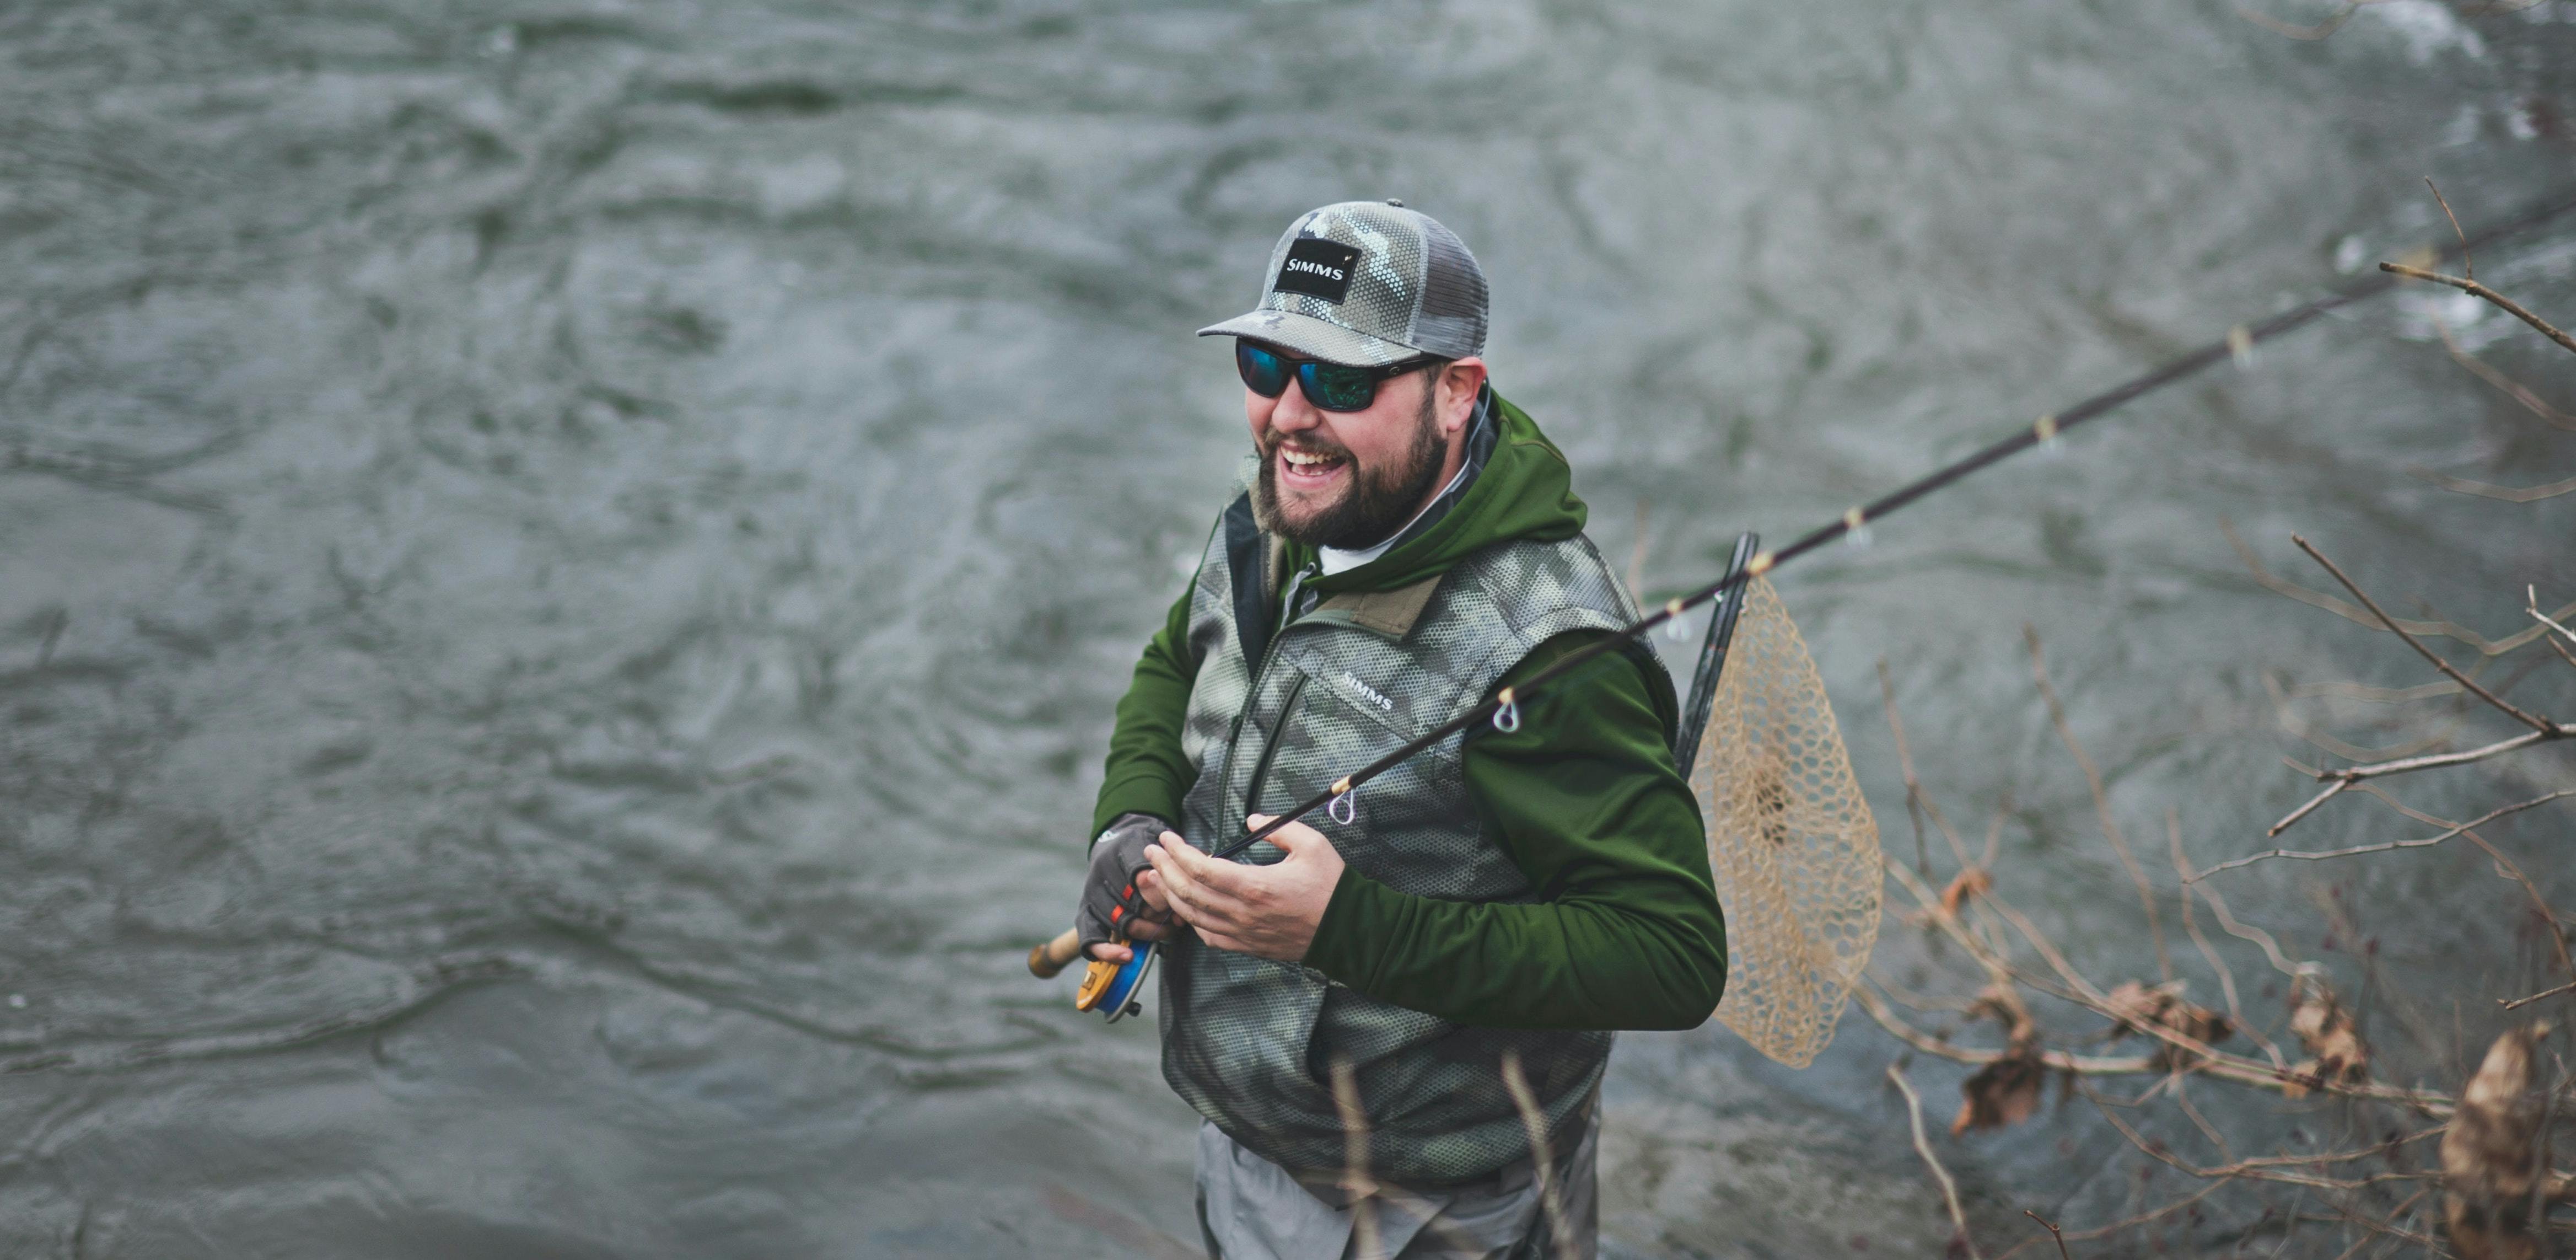 A man with fishing gear and wearing sunglasses stands in a river holding his fly rod.